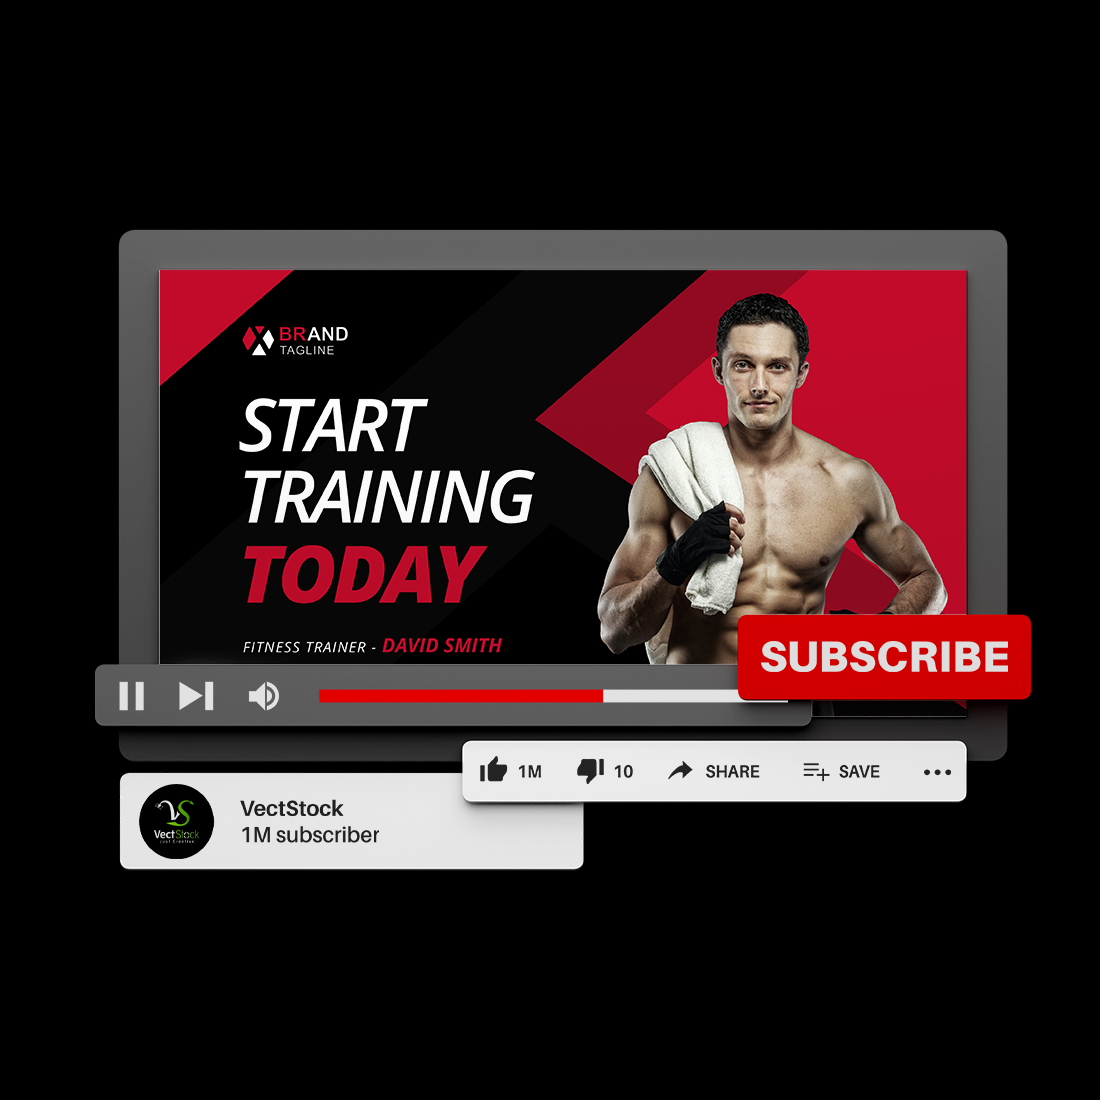 Gym fitness training Youtube thumbnail design preview image.